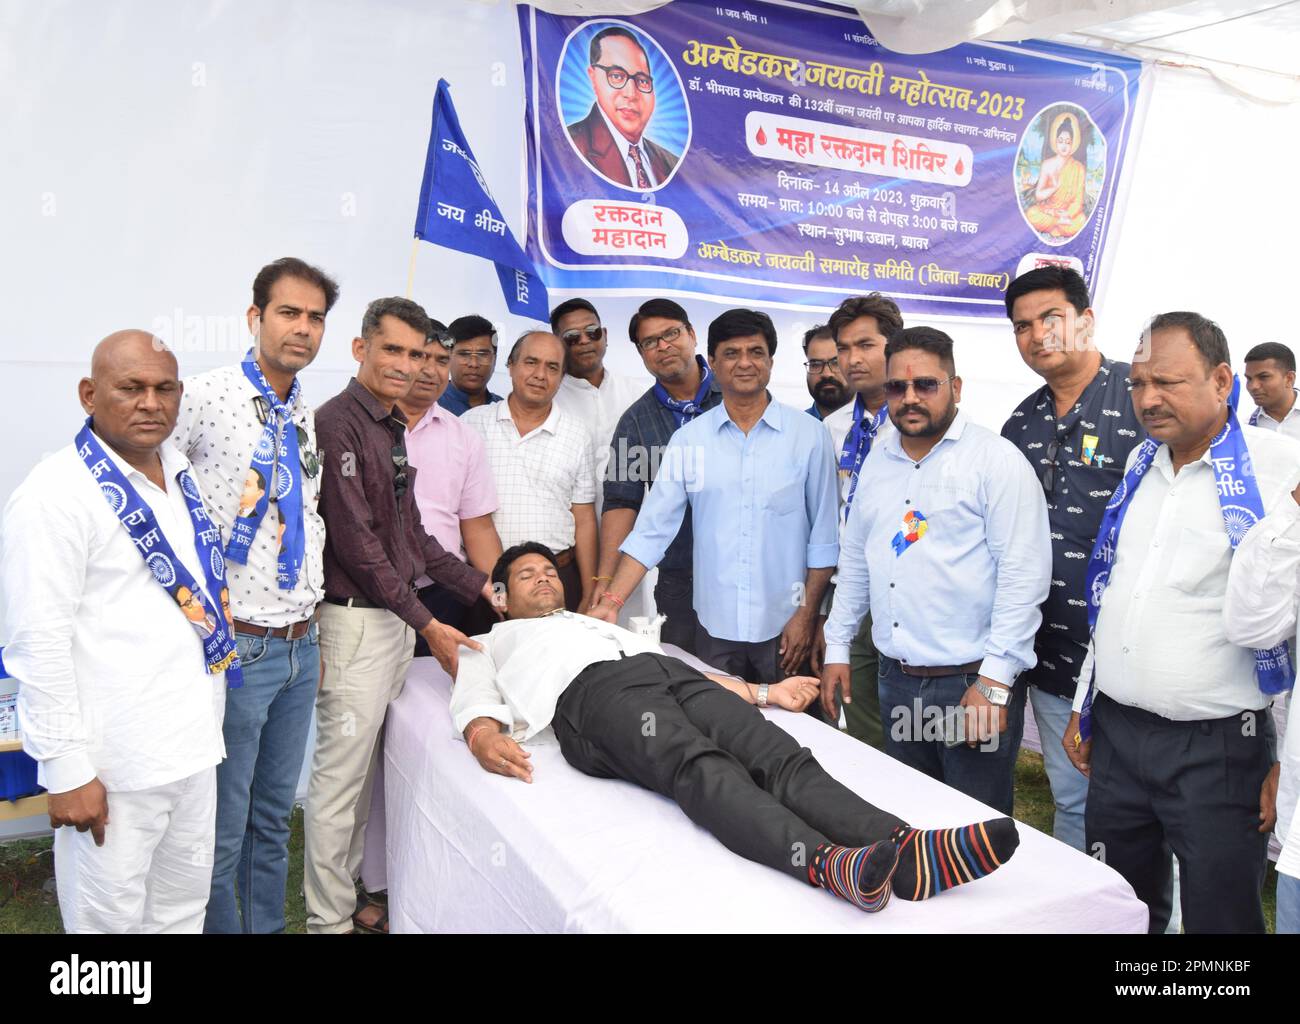 Beawar, Rajasthan, India, April 14, 2023: People of Dalit community donate blood during a charity event on the occasion of birth anniversary of Babasaheb Bhimrao Ambedkar in Beawar. Ambedkar Jayanti is celebrated on April 14 to mark the birth anniversary of Dr. Bhimrao Ambedkar, who is also remembered as the 'Father of the Indian Constitution'. Ambedkar was an Indian jurist, economist, politician and social reformer who inspired the Dalit Buddhist Movement. Credit: Sumit Saraswat/Alamy Live News Stock Photo